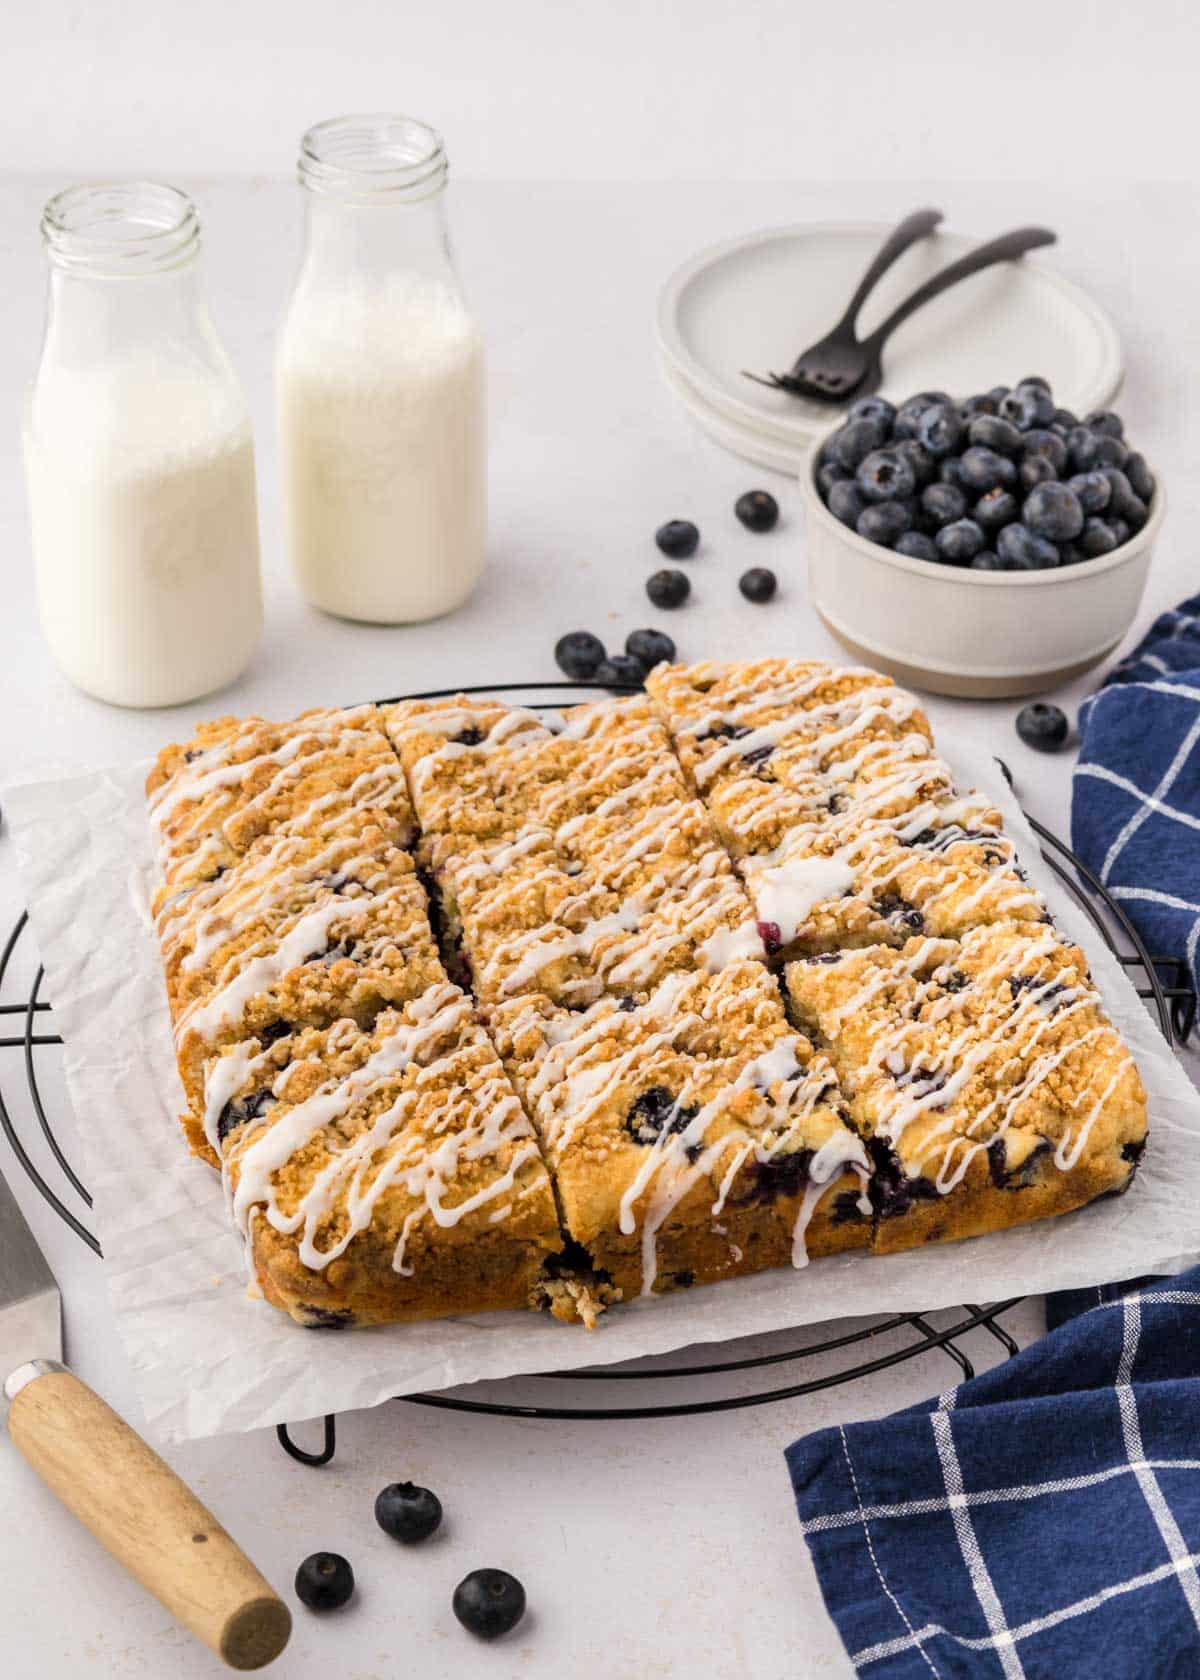 A blueberry coffee cake on a round cooling rack with a wooden serving spatula.